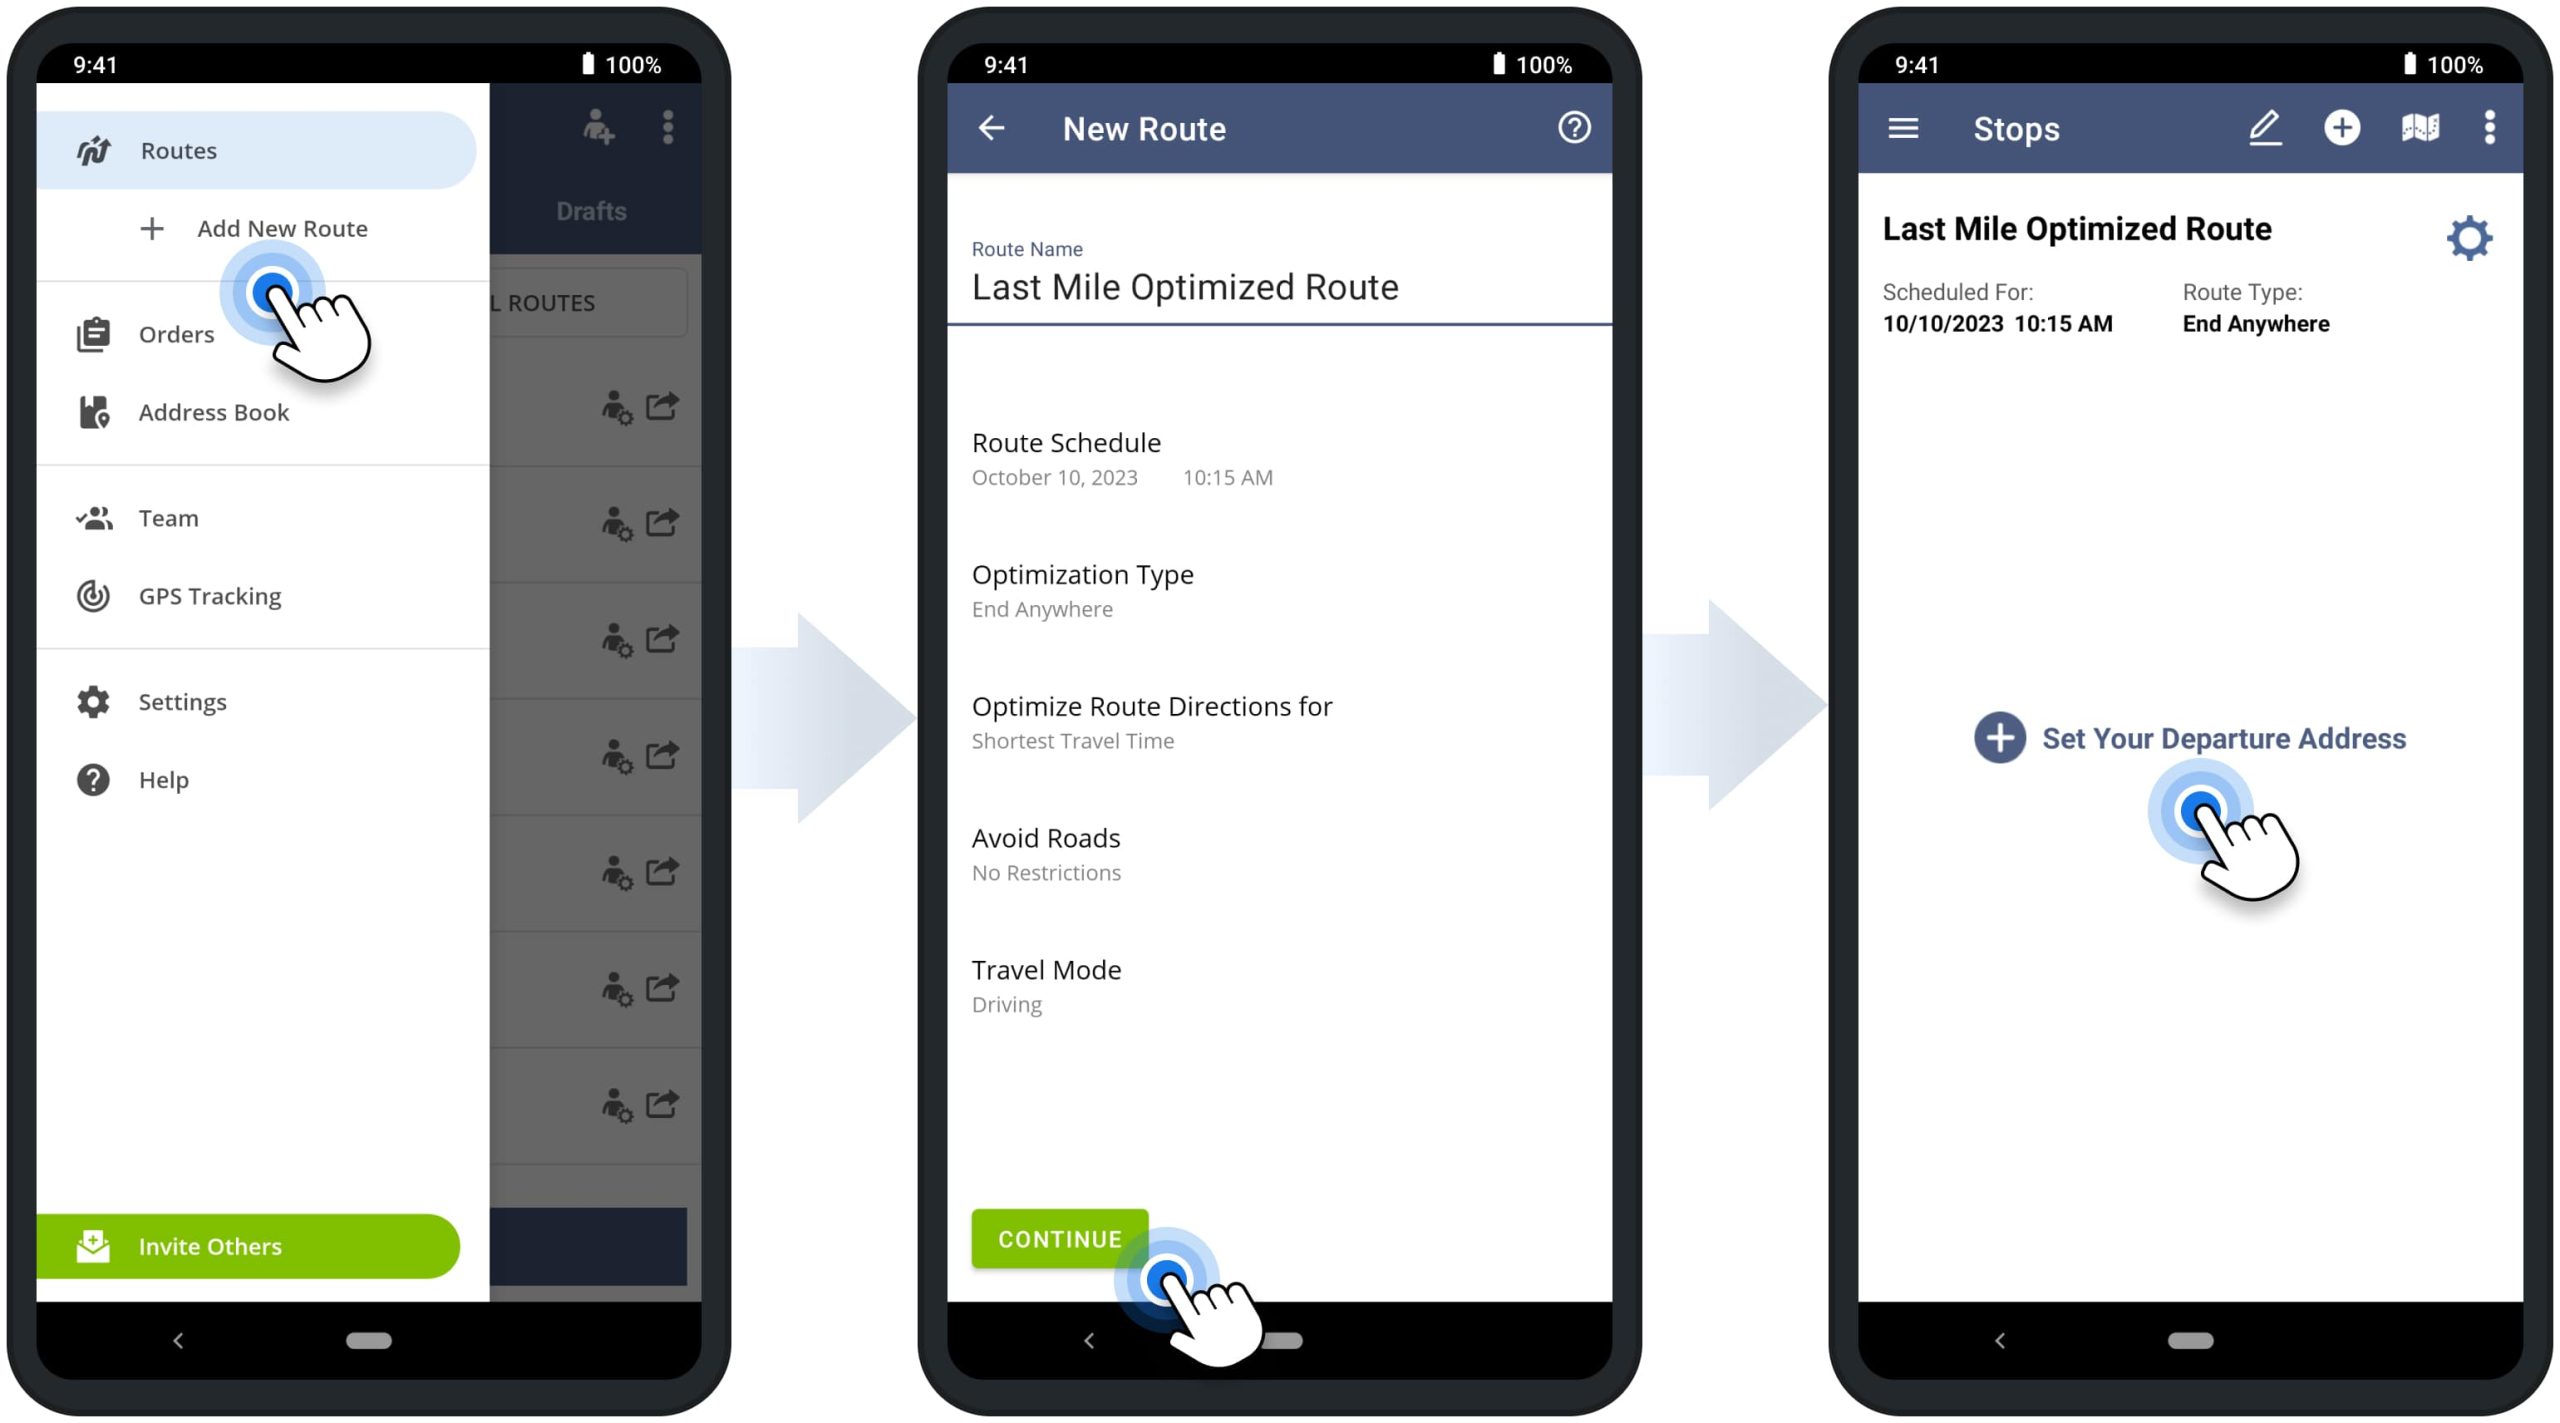 Plan a new route, schedule the route, and adjust route optimization settings on Route4Me's multi-stop route planner app.